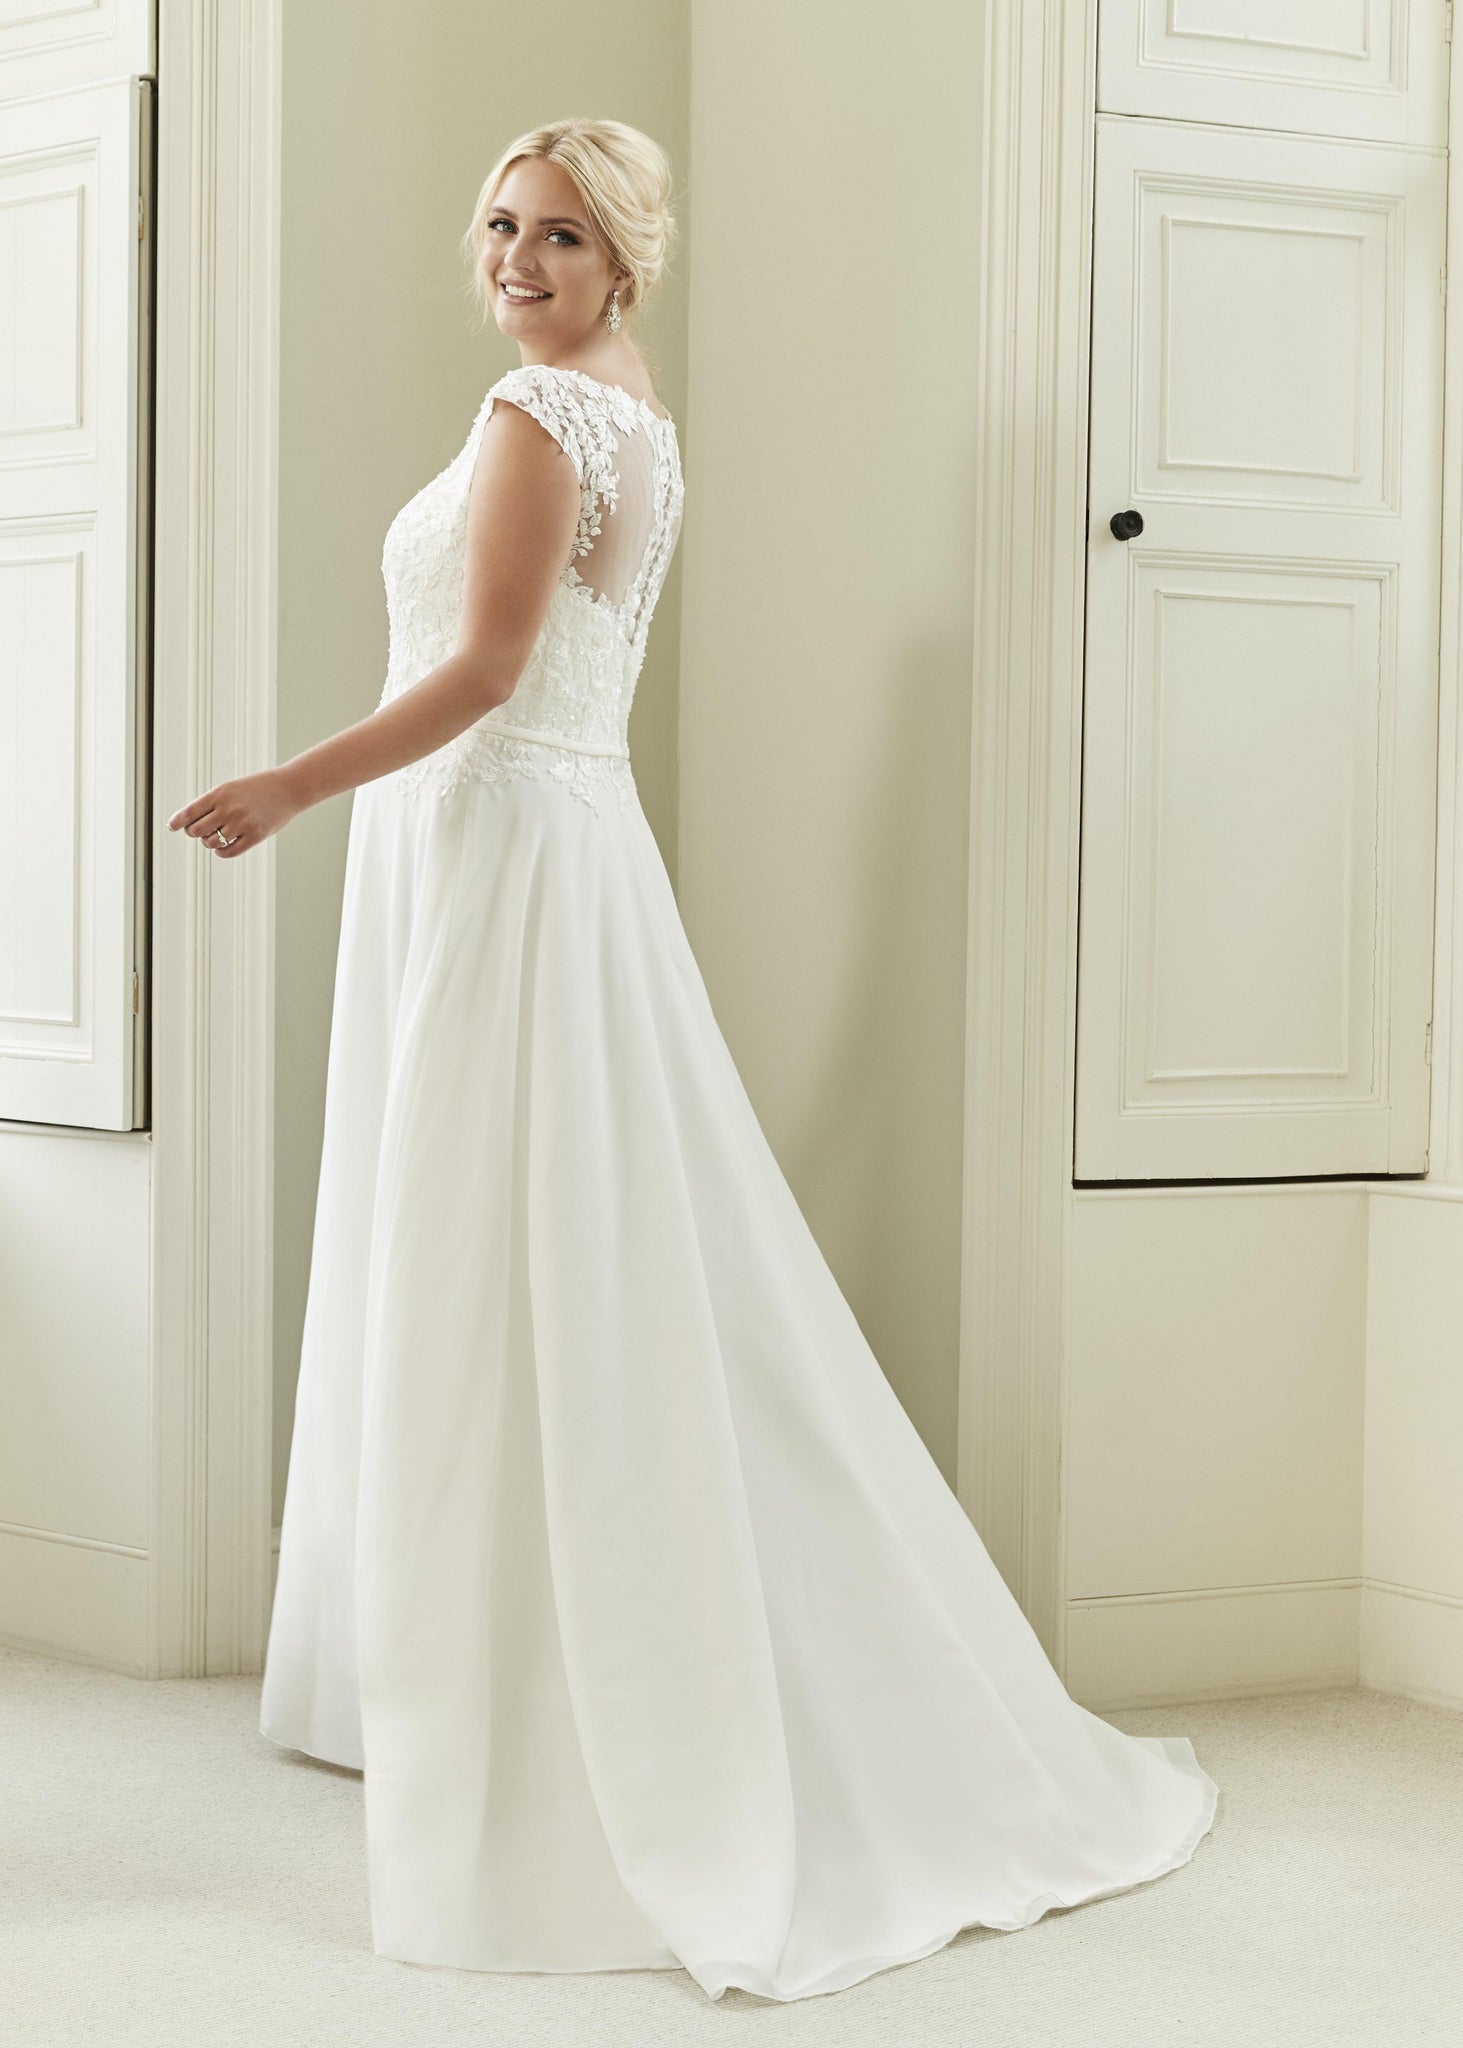 UK22 AbbieLeigh - Adore Bridal and Occasion Wear